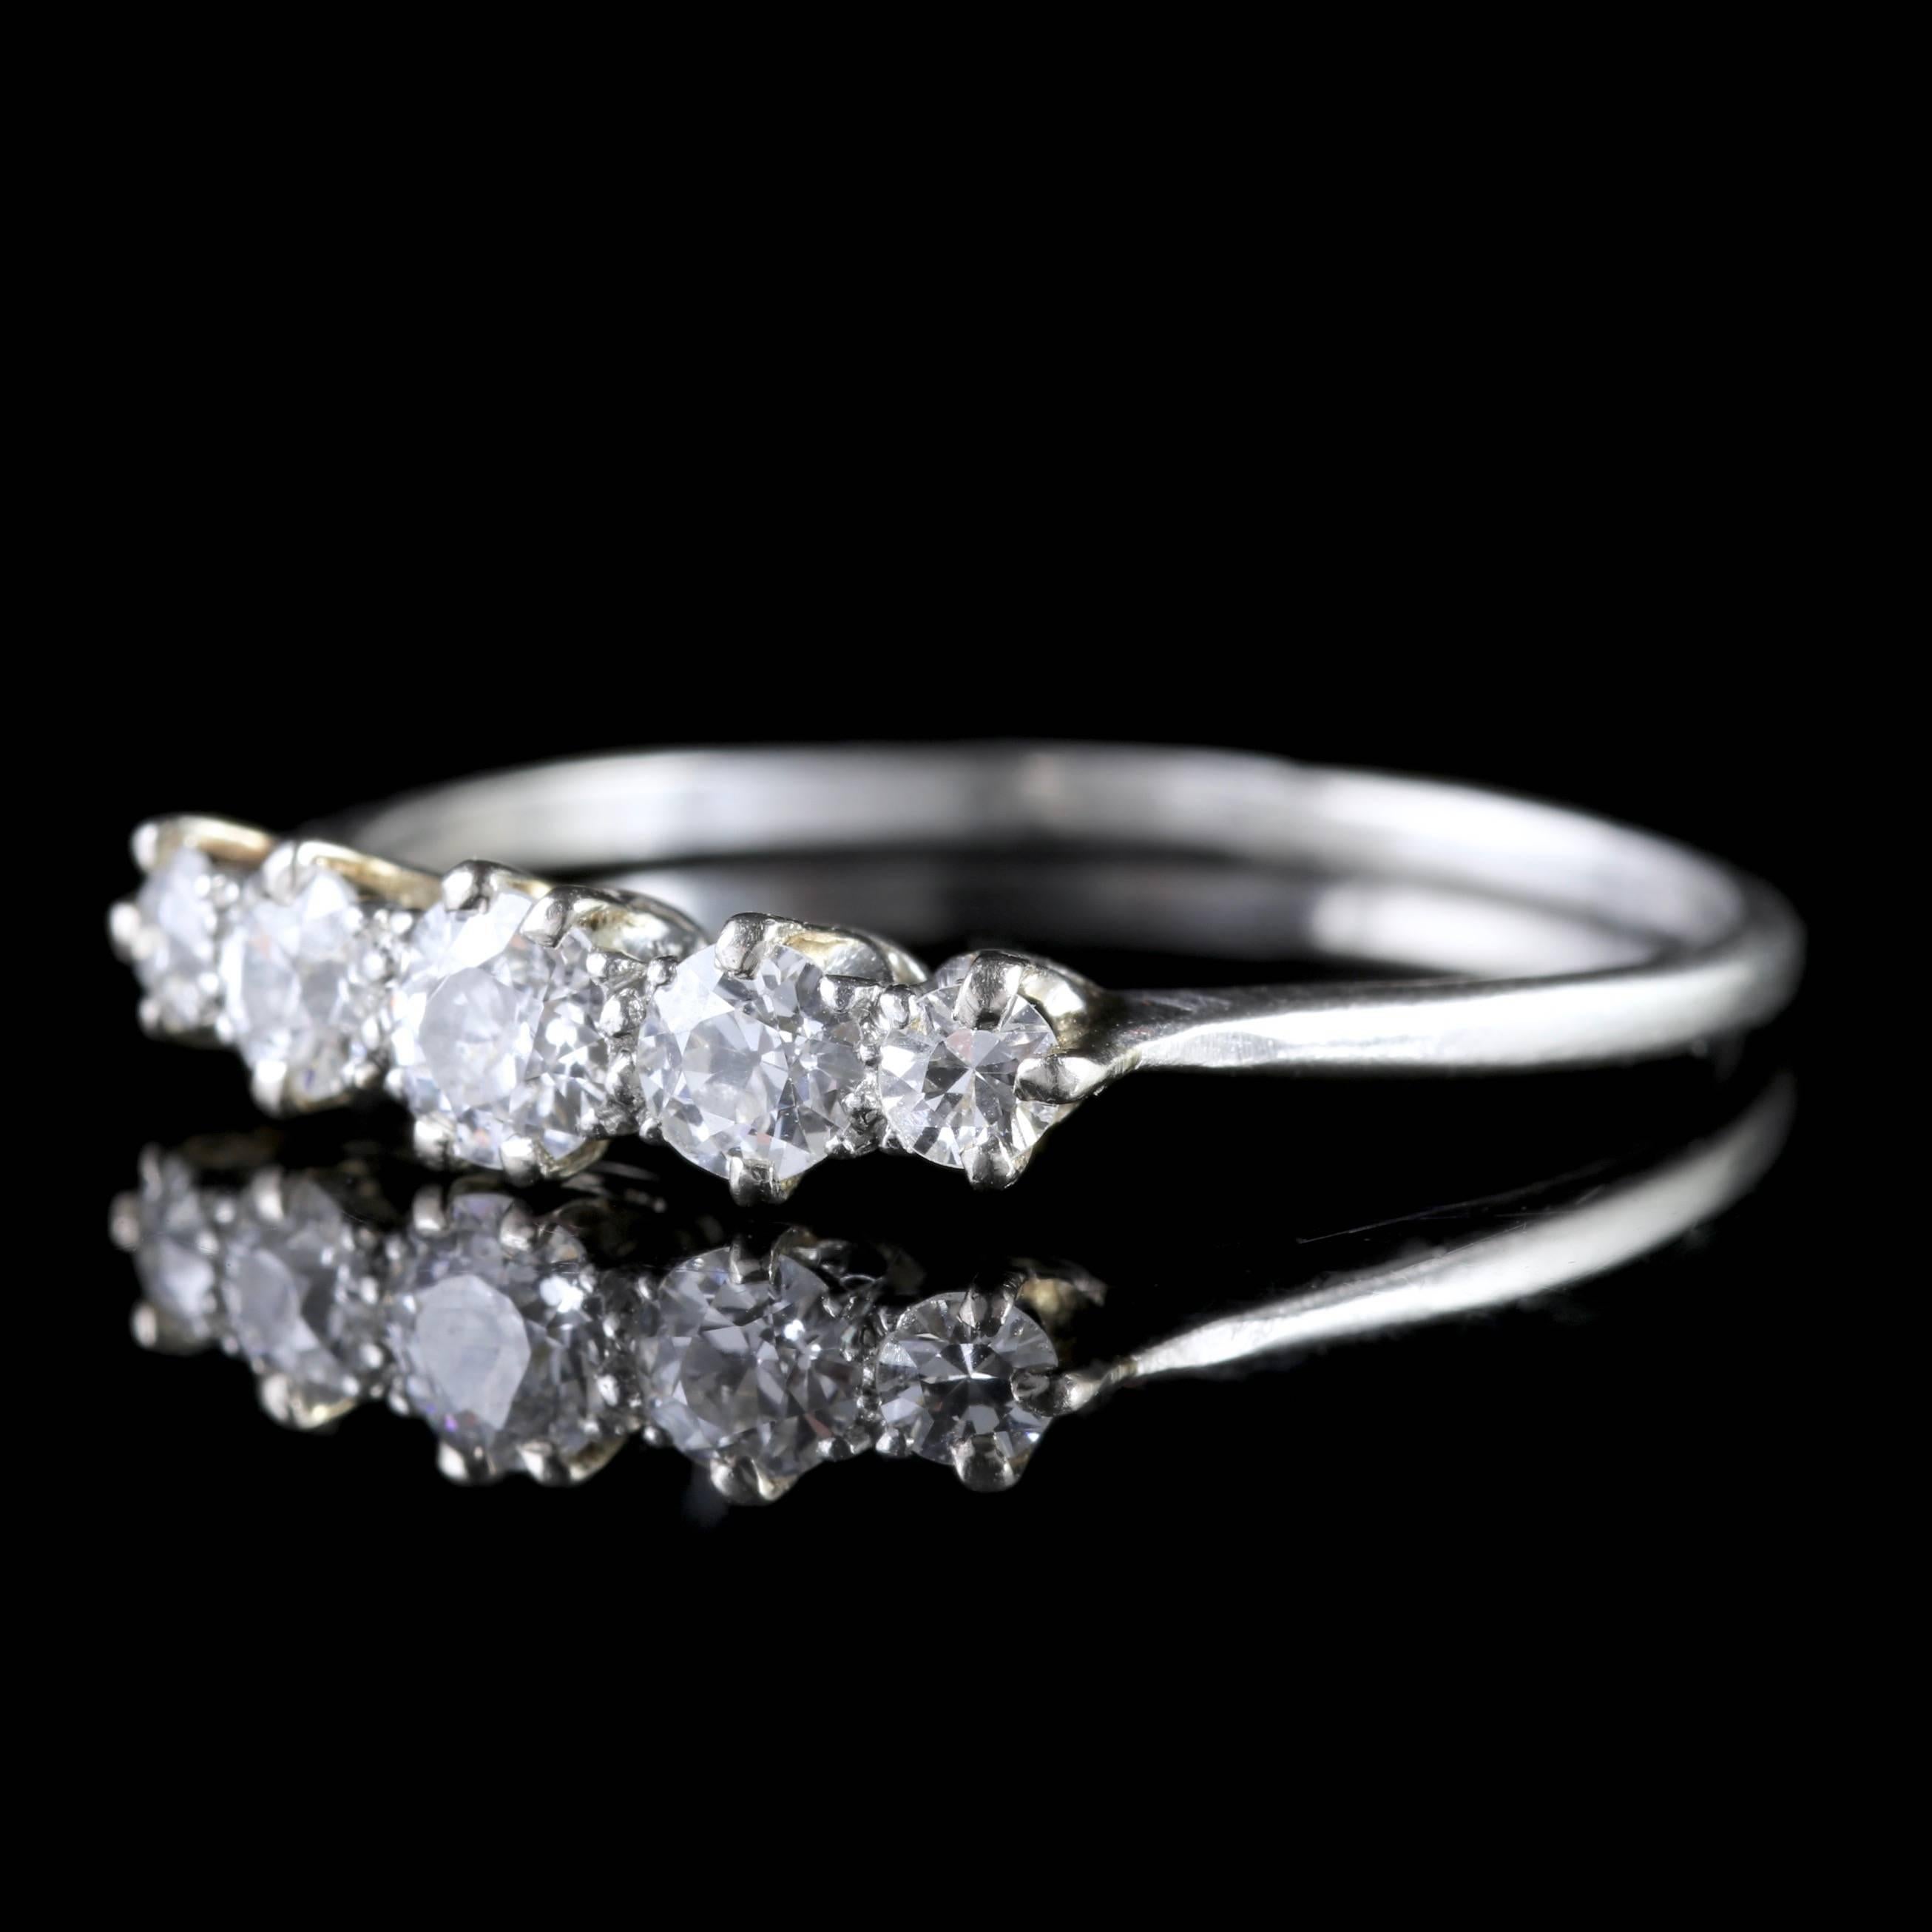 To read more please click continue reading below-

This fabulous Antique 18ct White Gold, five stone Diamond ring is genuine Edwardian Circa 1910. 

The ring boasts five beautiful old cut Diamonds that are superb cut, colour and clarity - SI 1 H